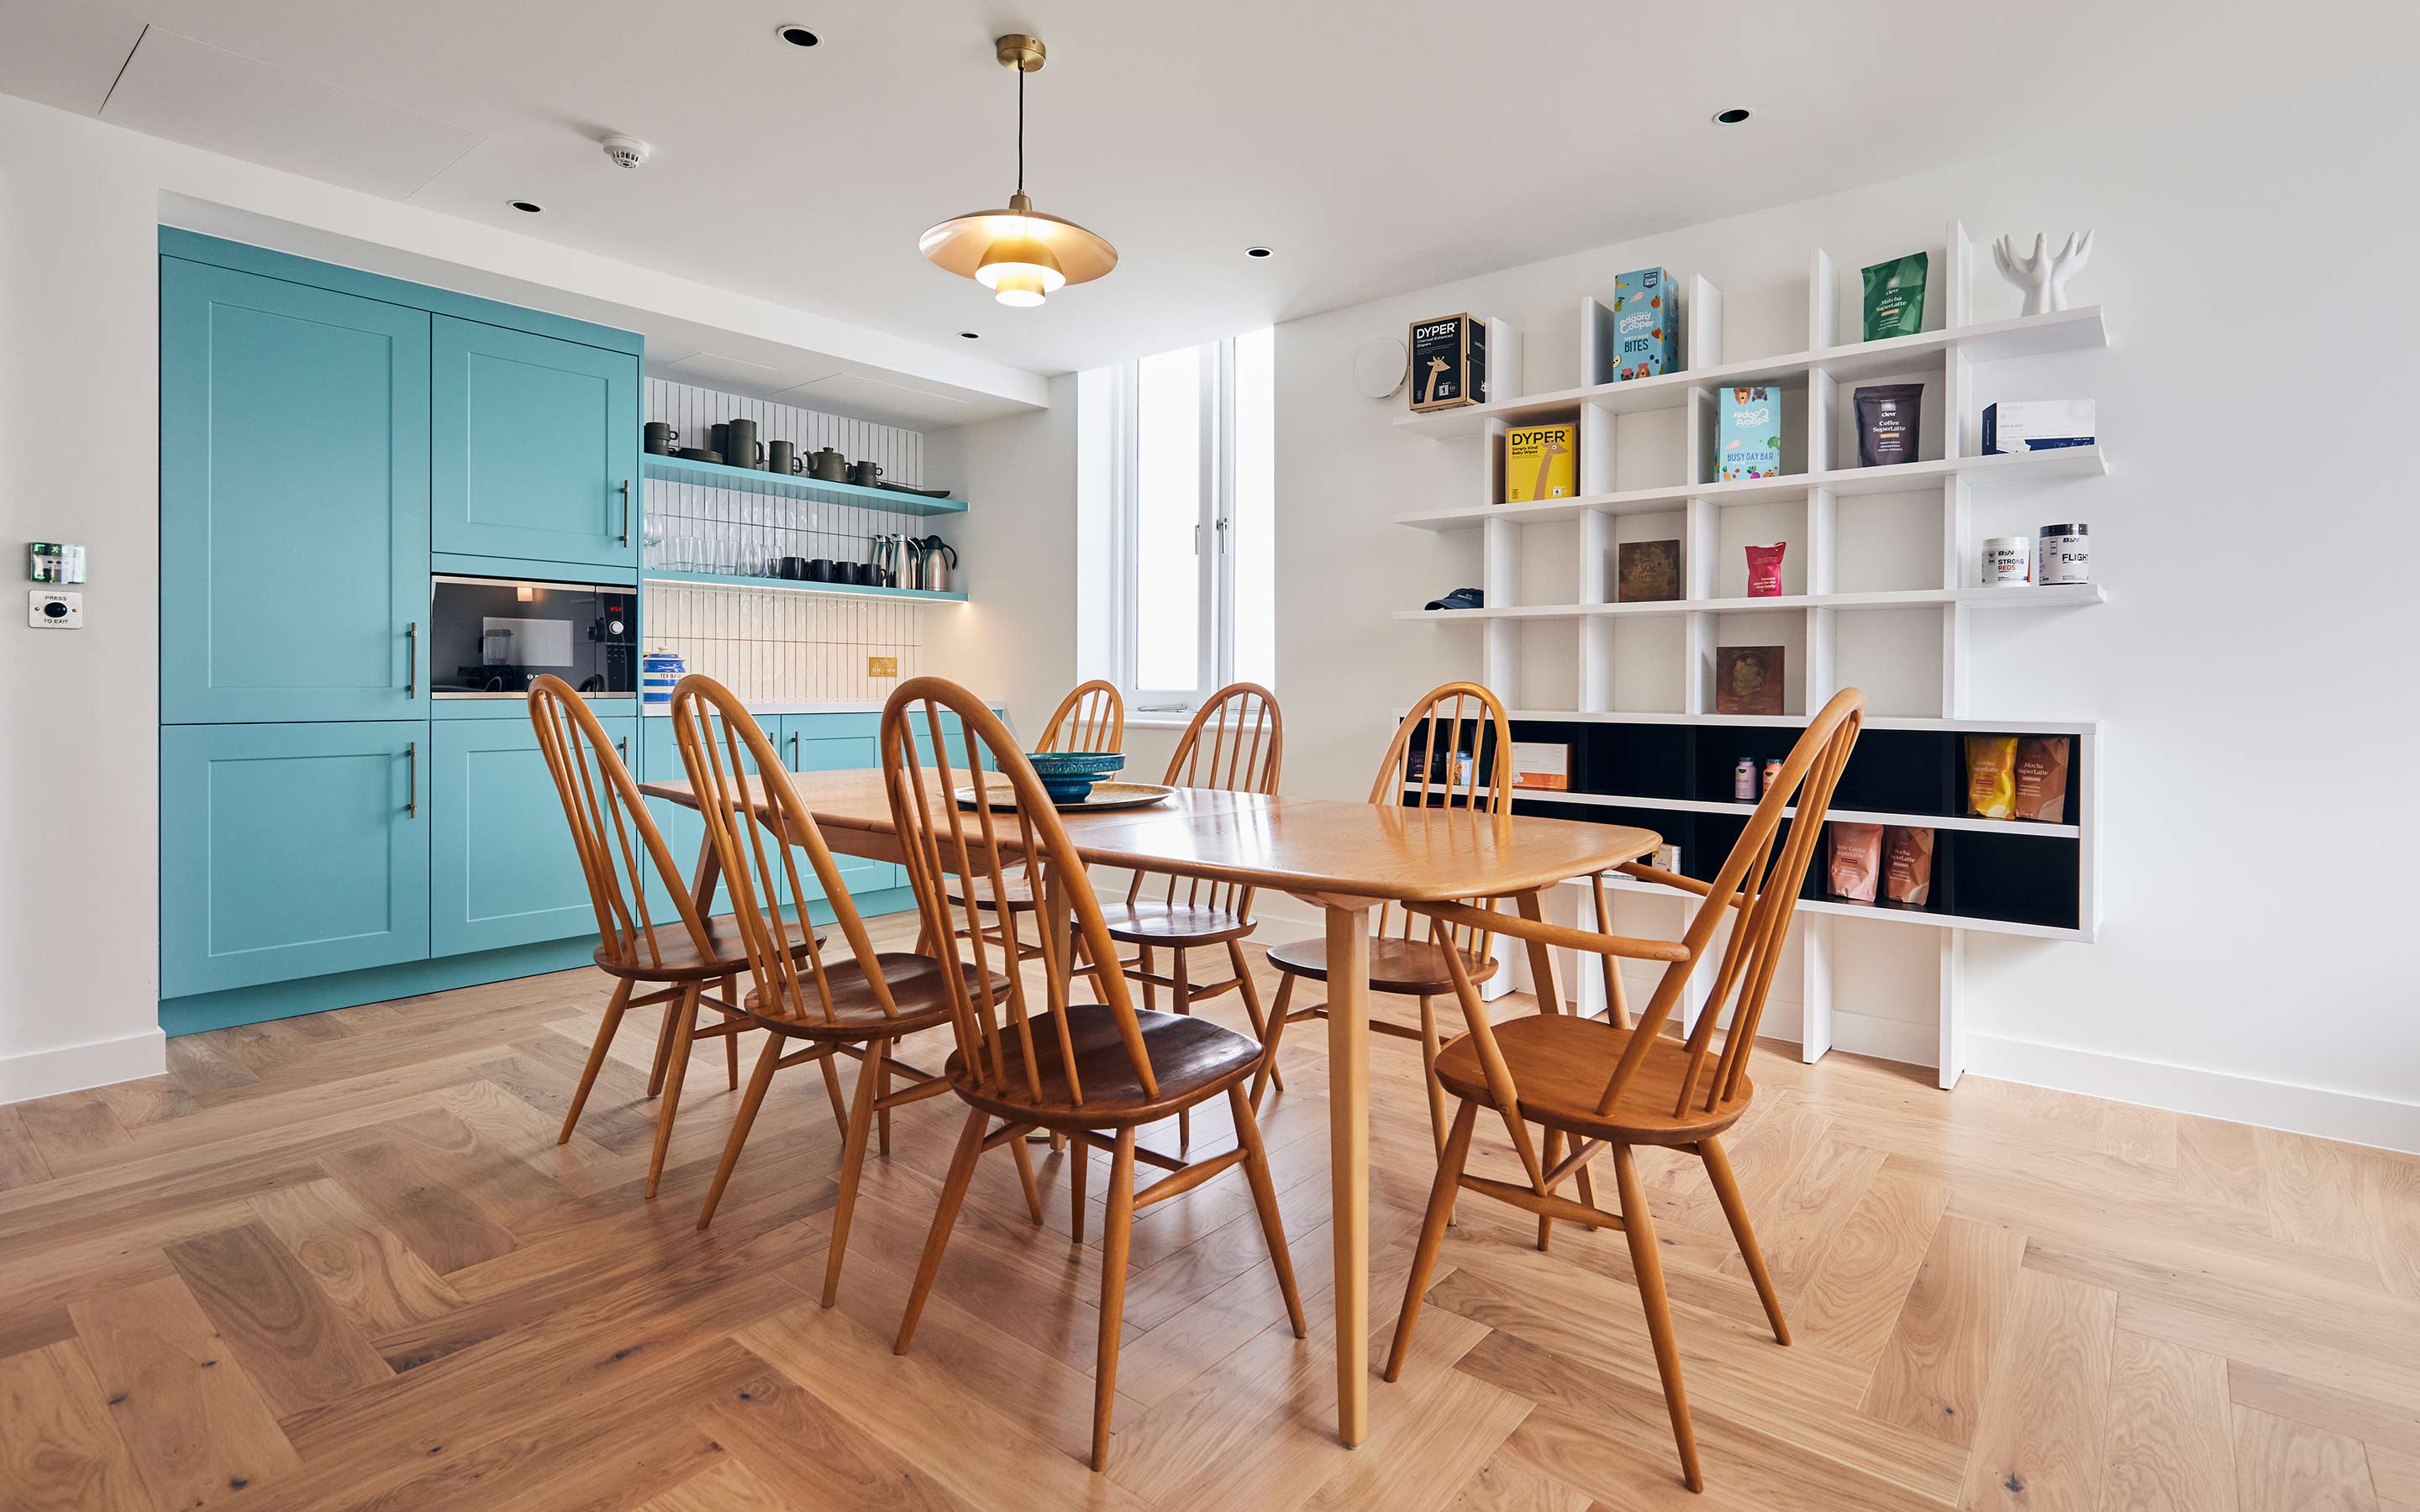 The image shows a wooden kitchen table and chairs, duck egg blue cabinets and shelving units filled with crockery